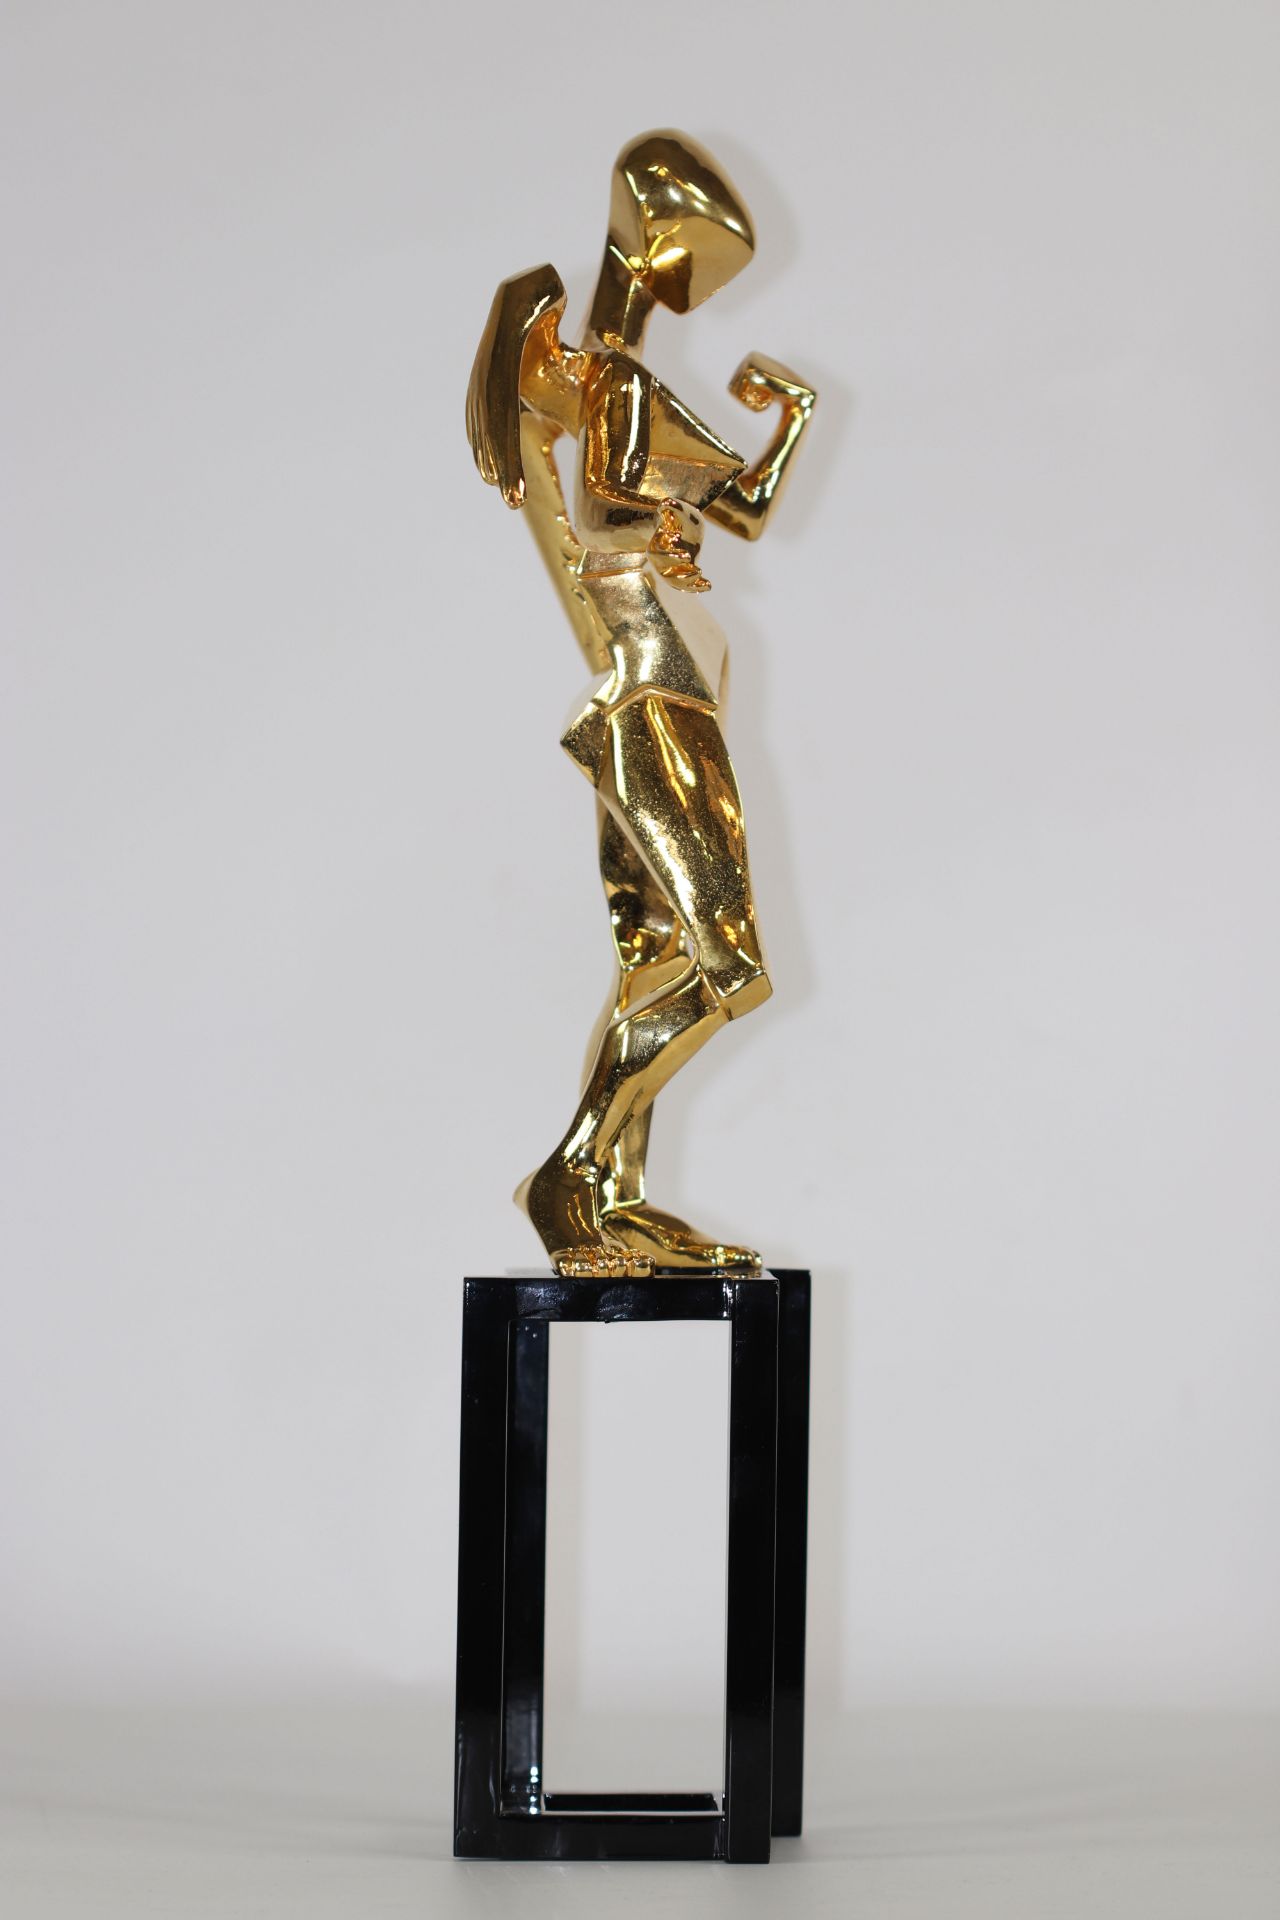 Salvador Dali The Cubist Angel 1983 Bronze gilded with 24 carat fine gold Signed"Dali" Numbered 938/ - Image 3 of 8